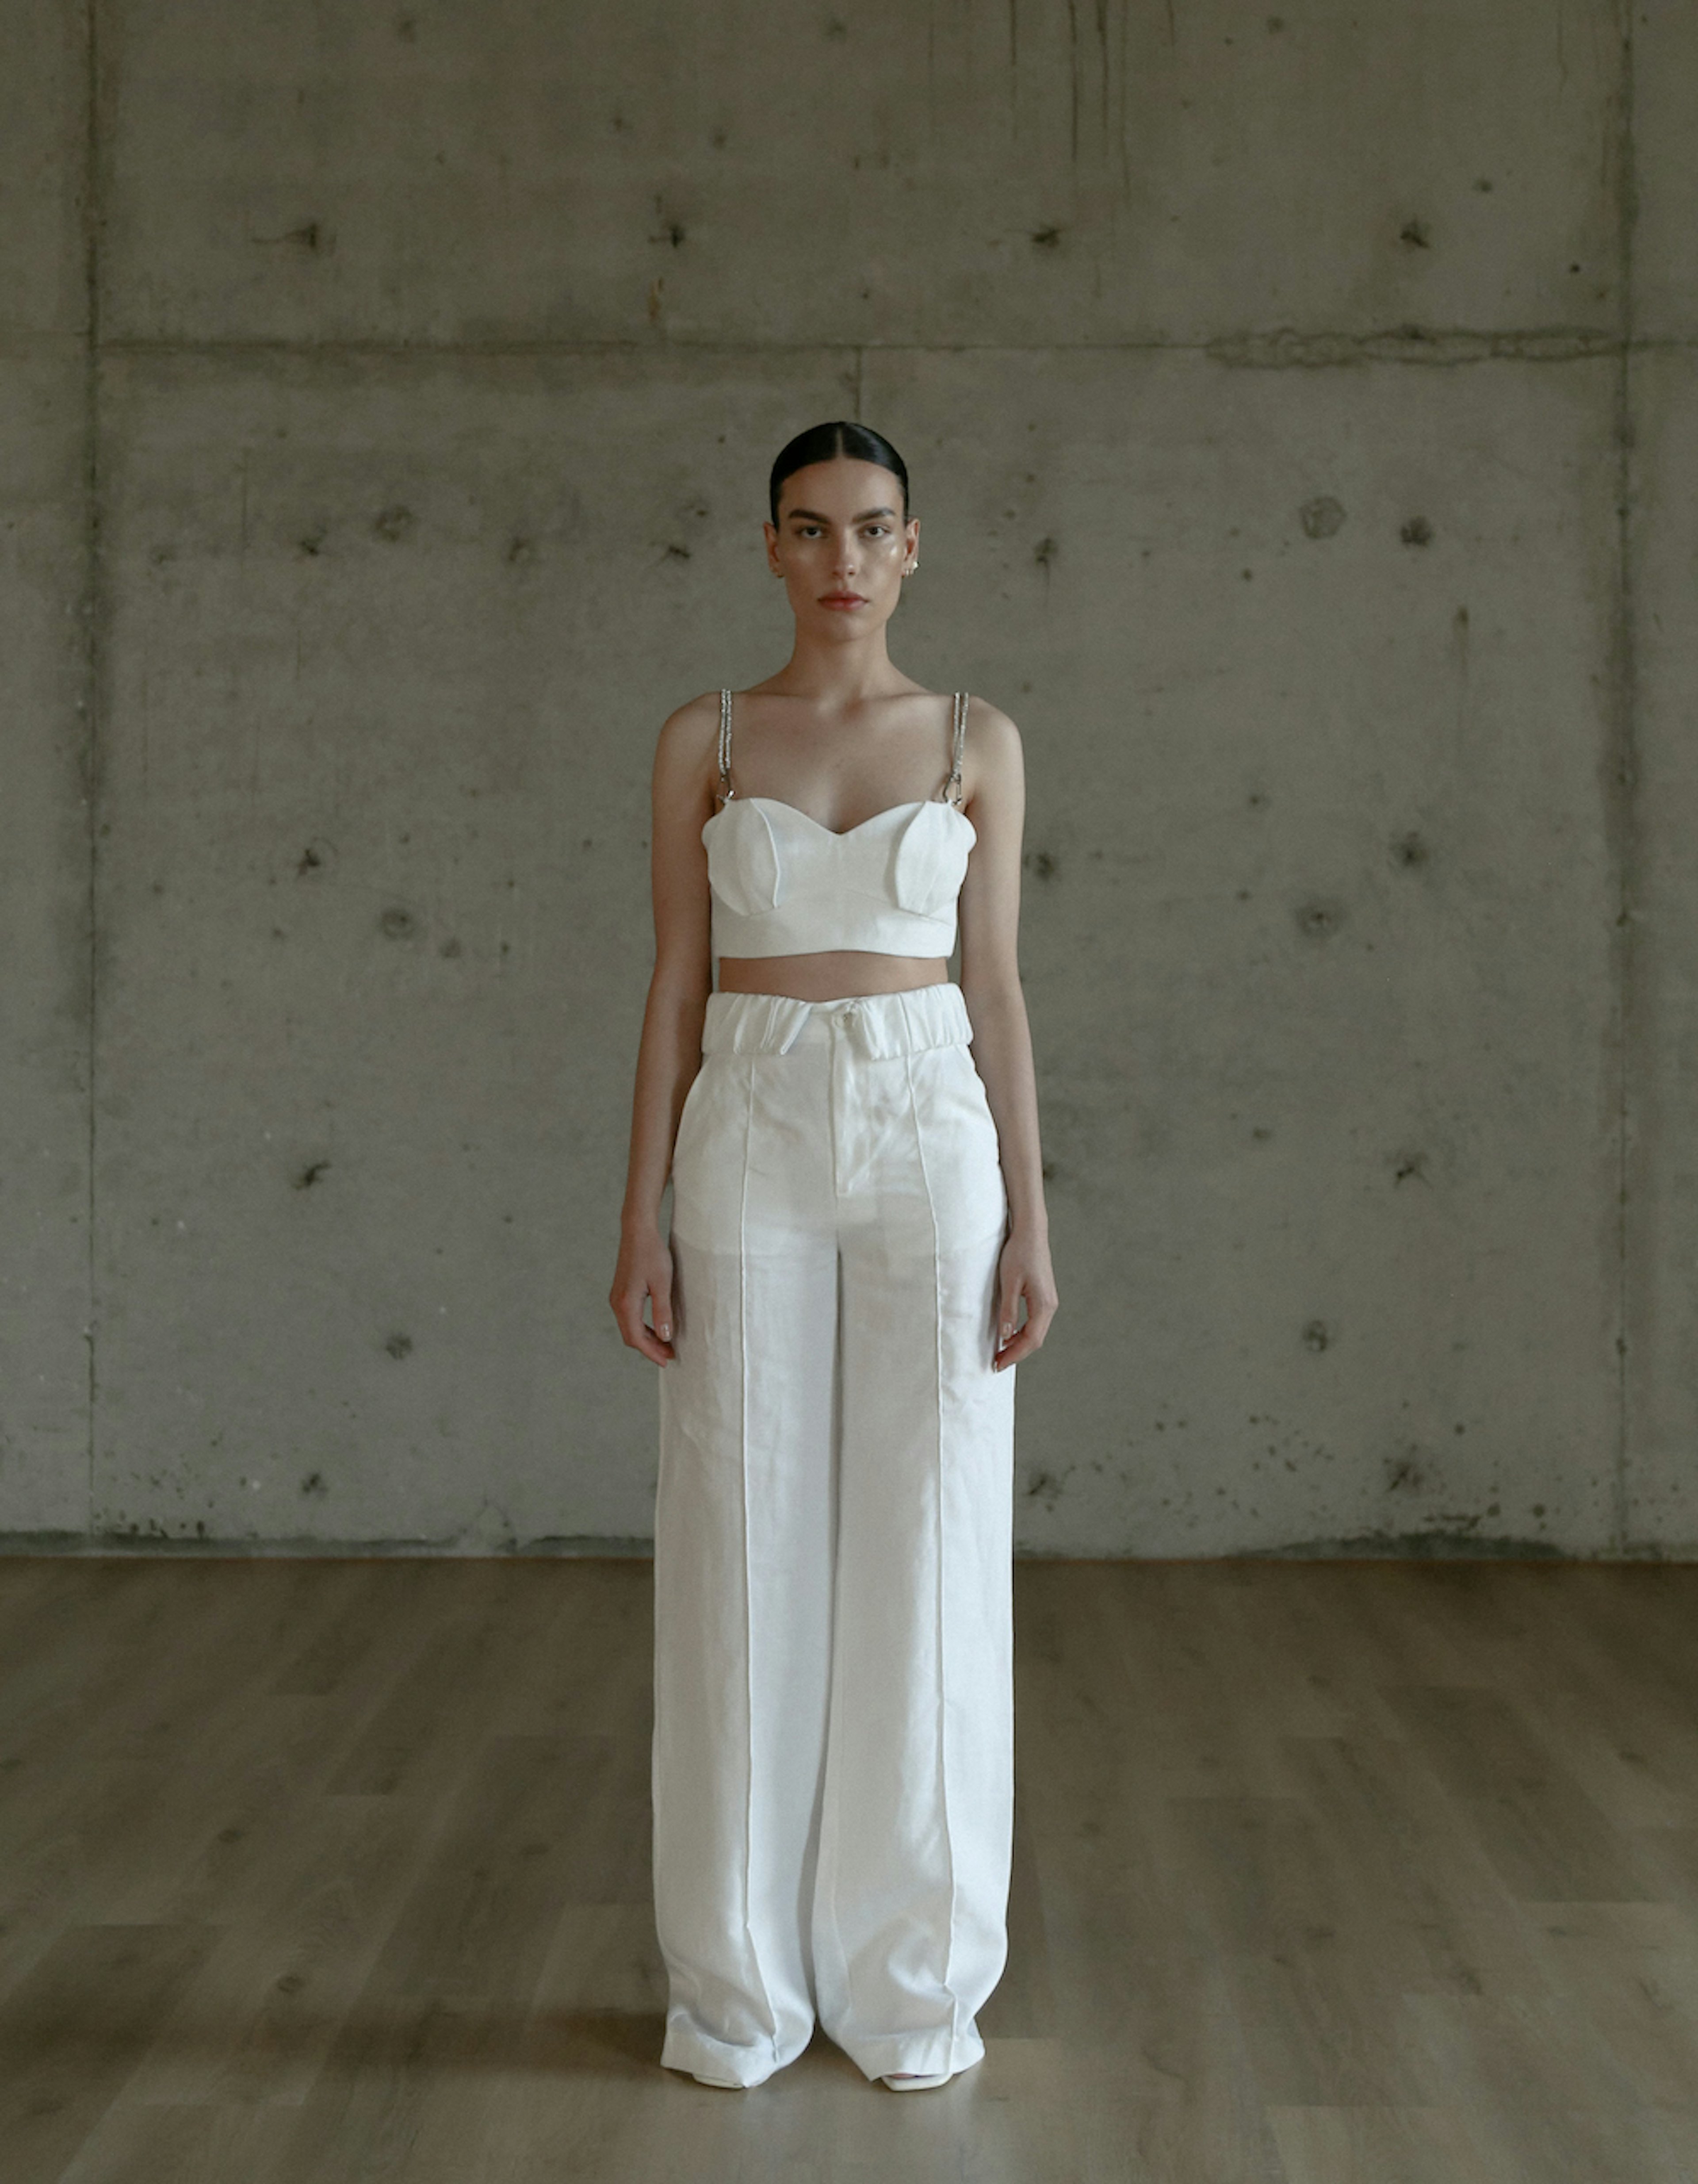 Shop ANJA White Linen Set from MAET at Seezona